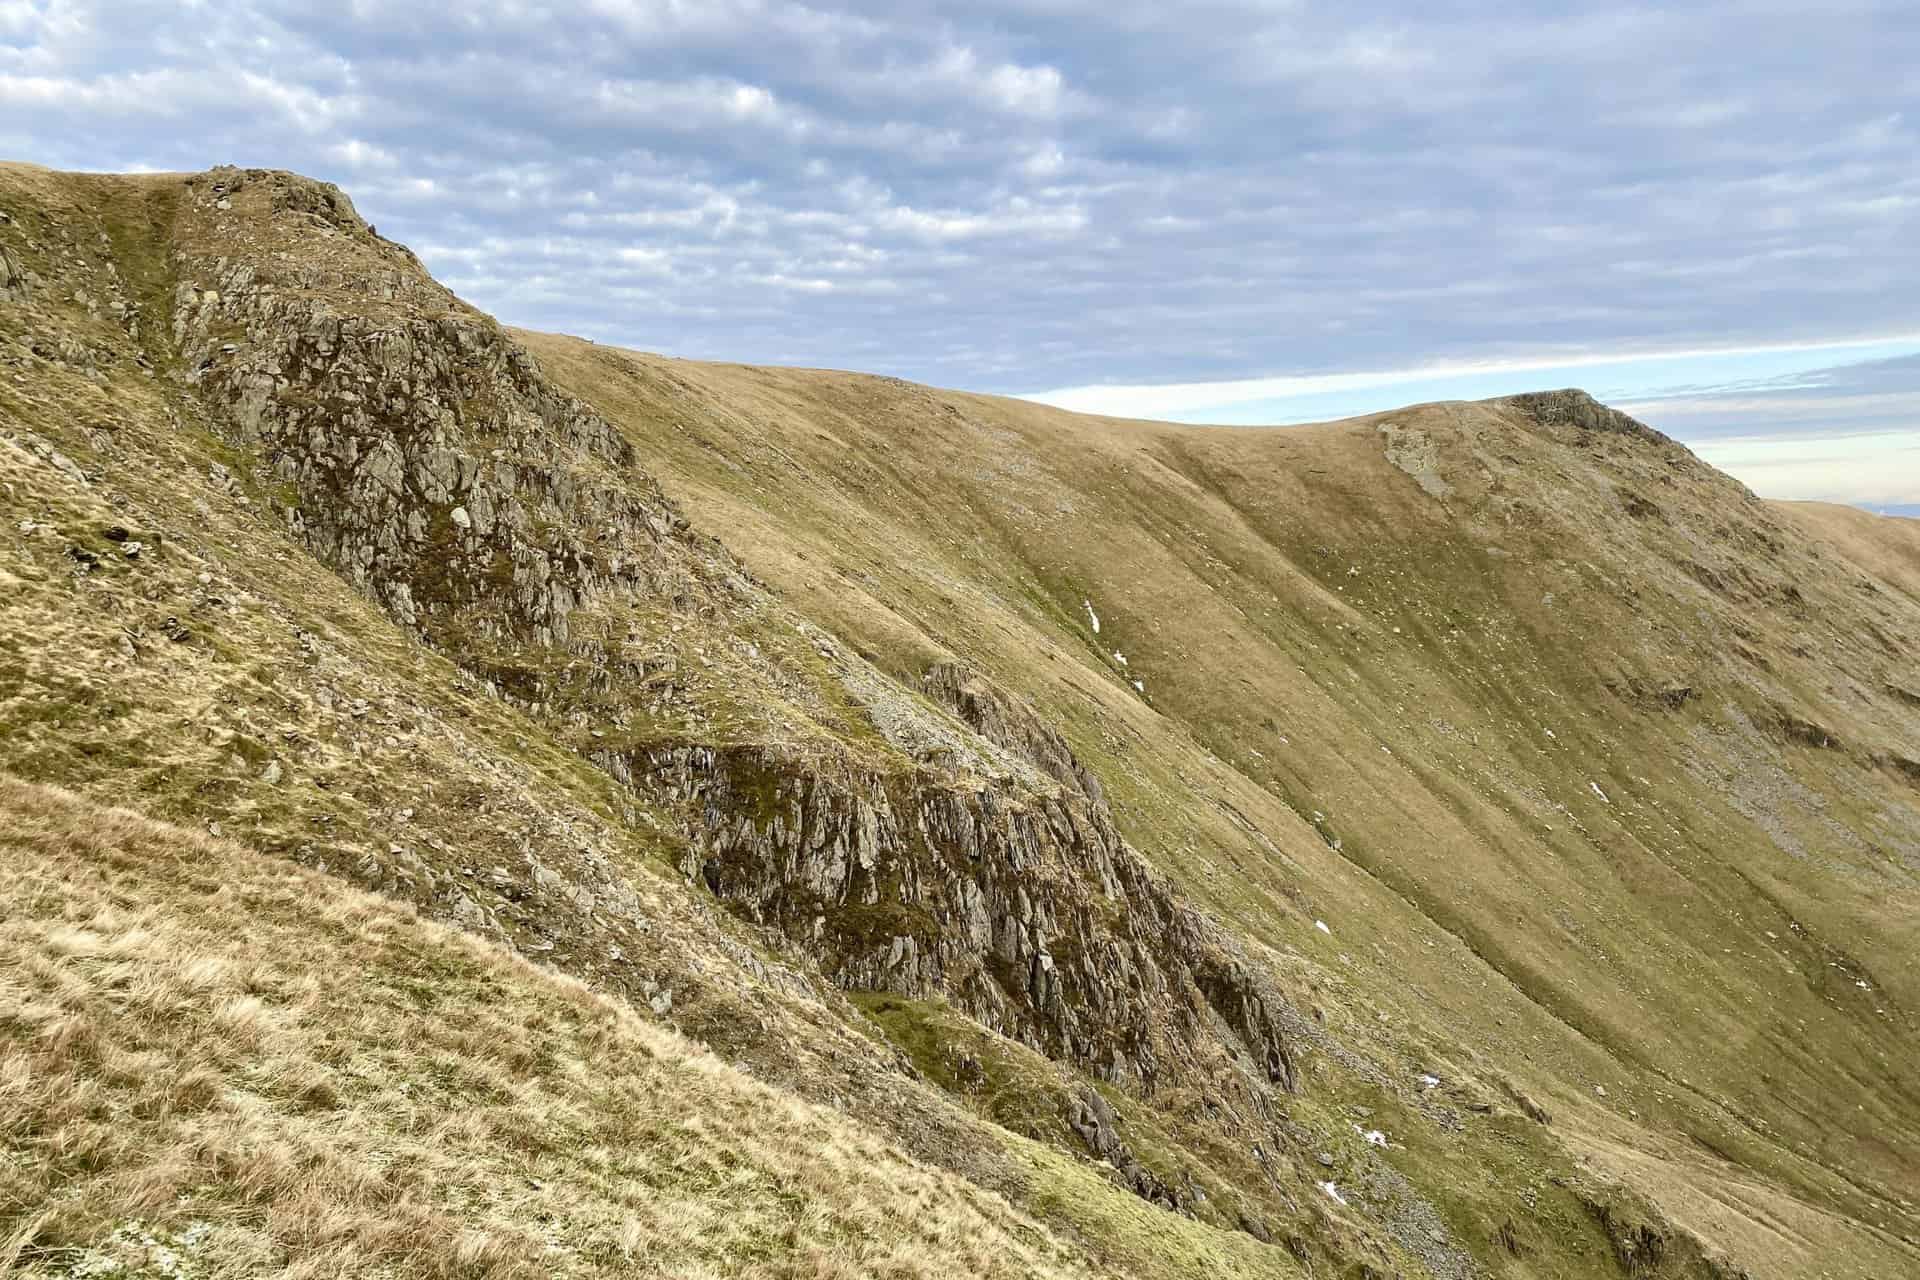 Twopenny Crag (left) and Kidsty Pike (right), landmarks visible on the Stony Cove Pike journey.